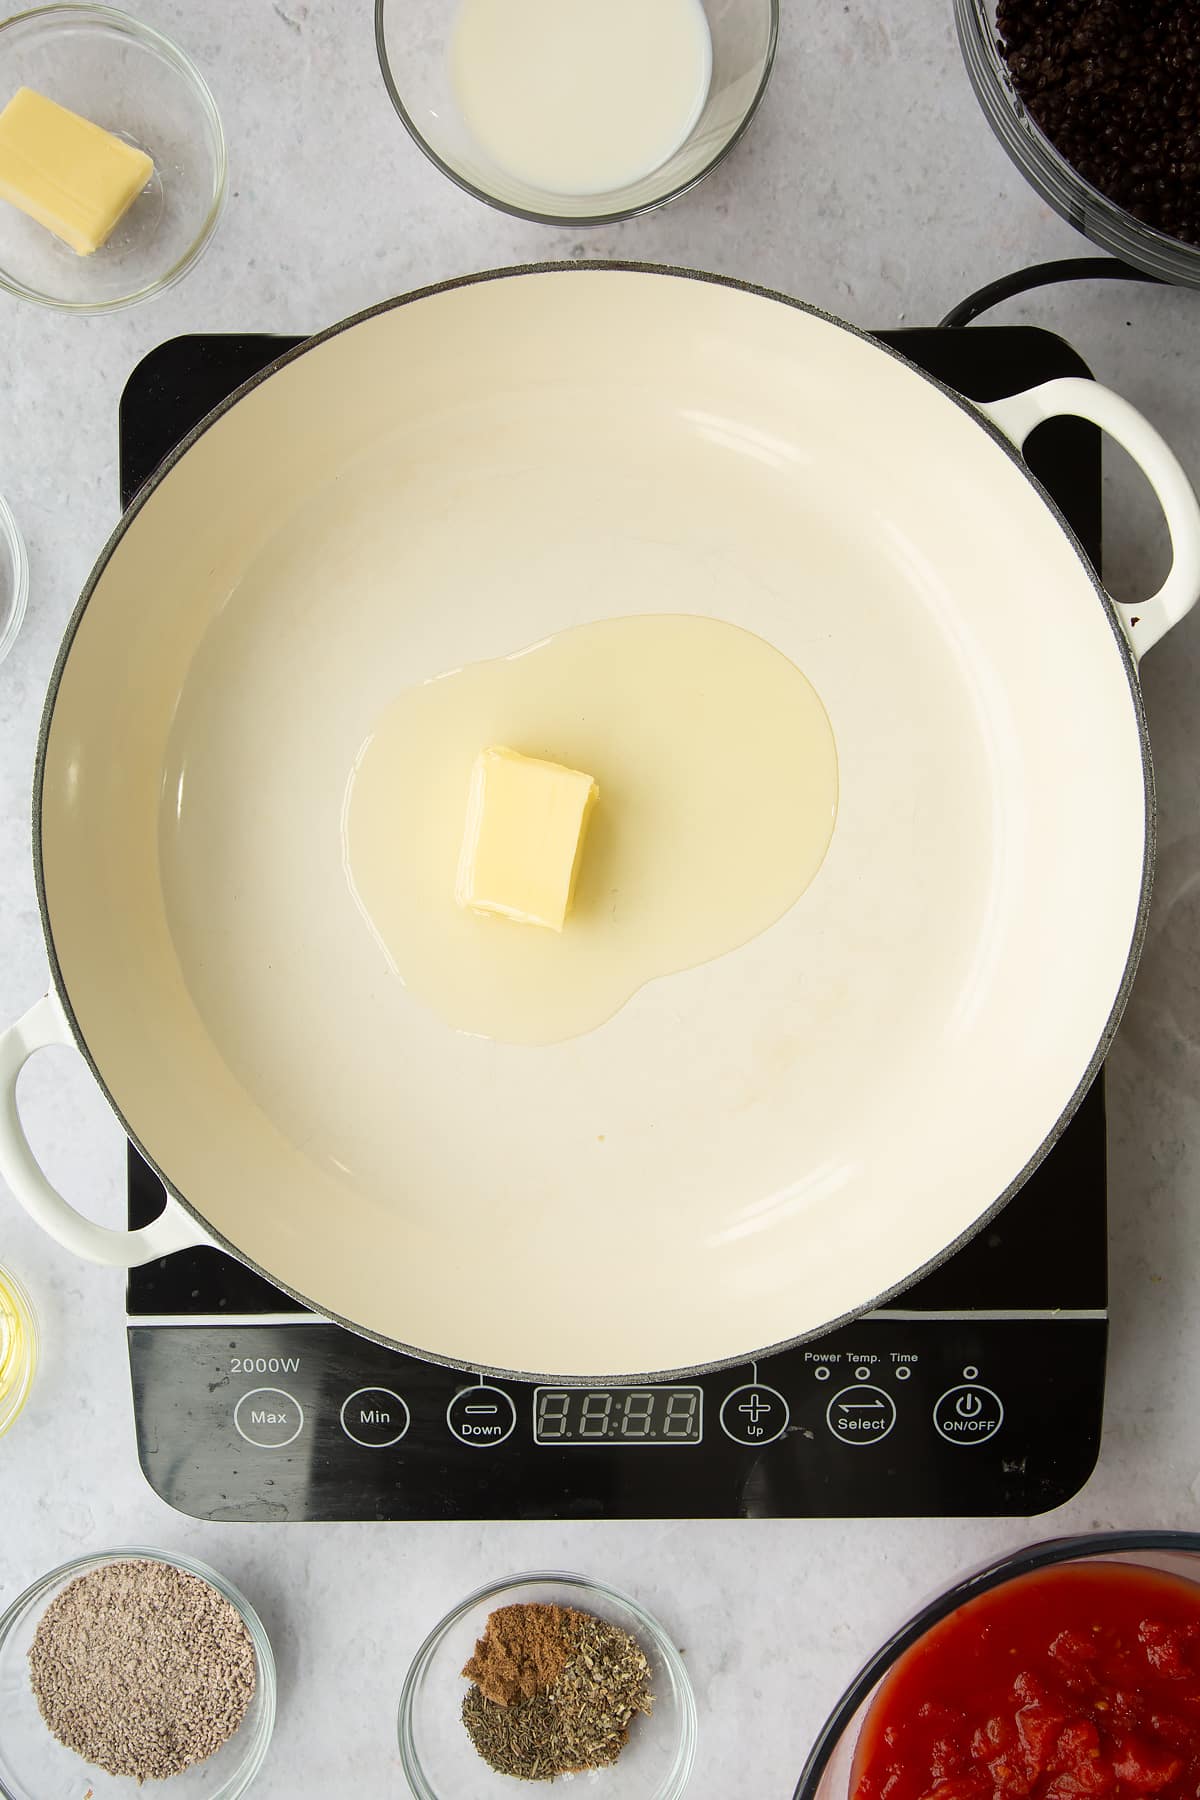 a large frying pan on induction hob with butter melting in the middle.